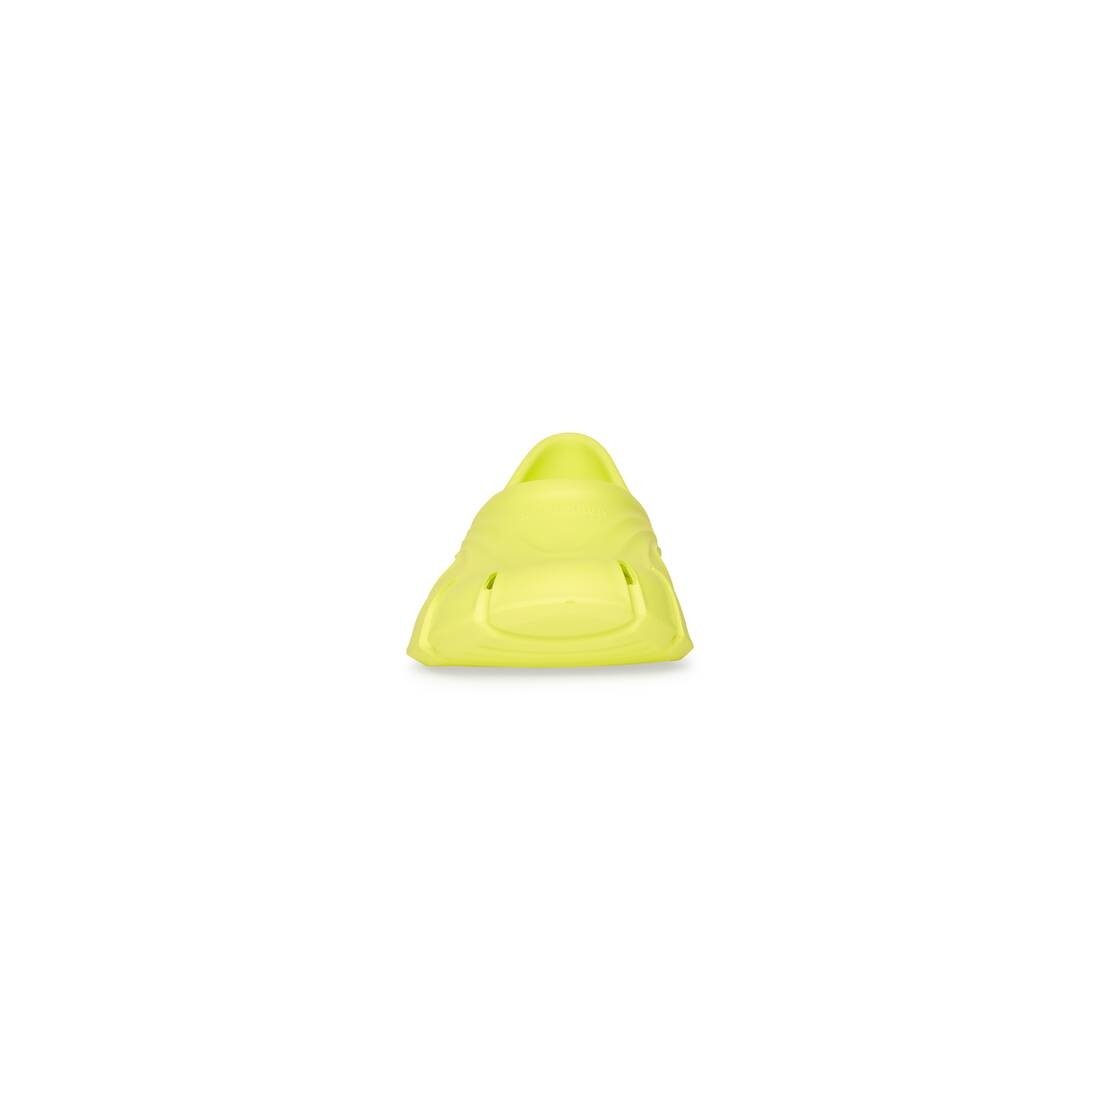 Men's Mold Closed in Yellow - 3